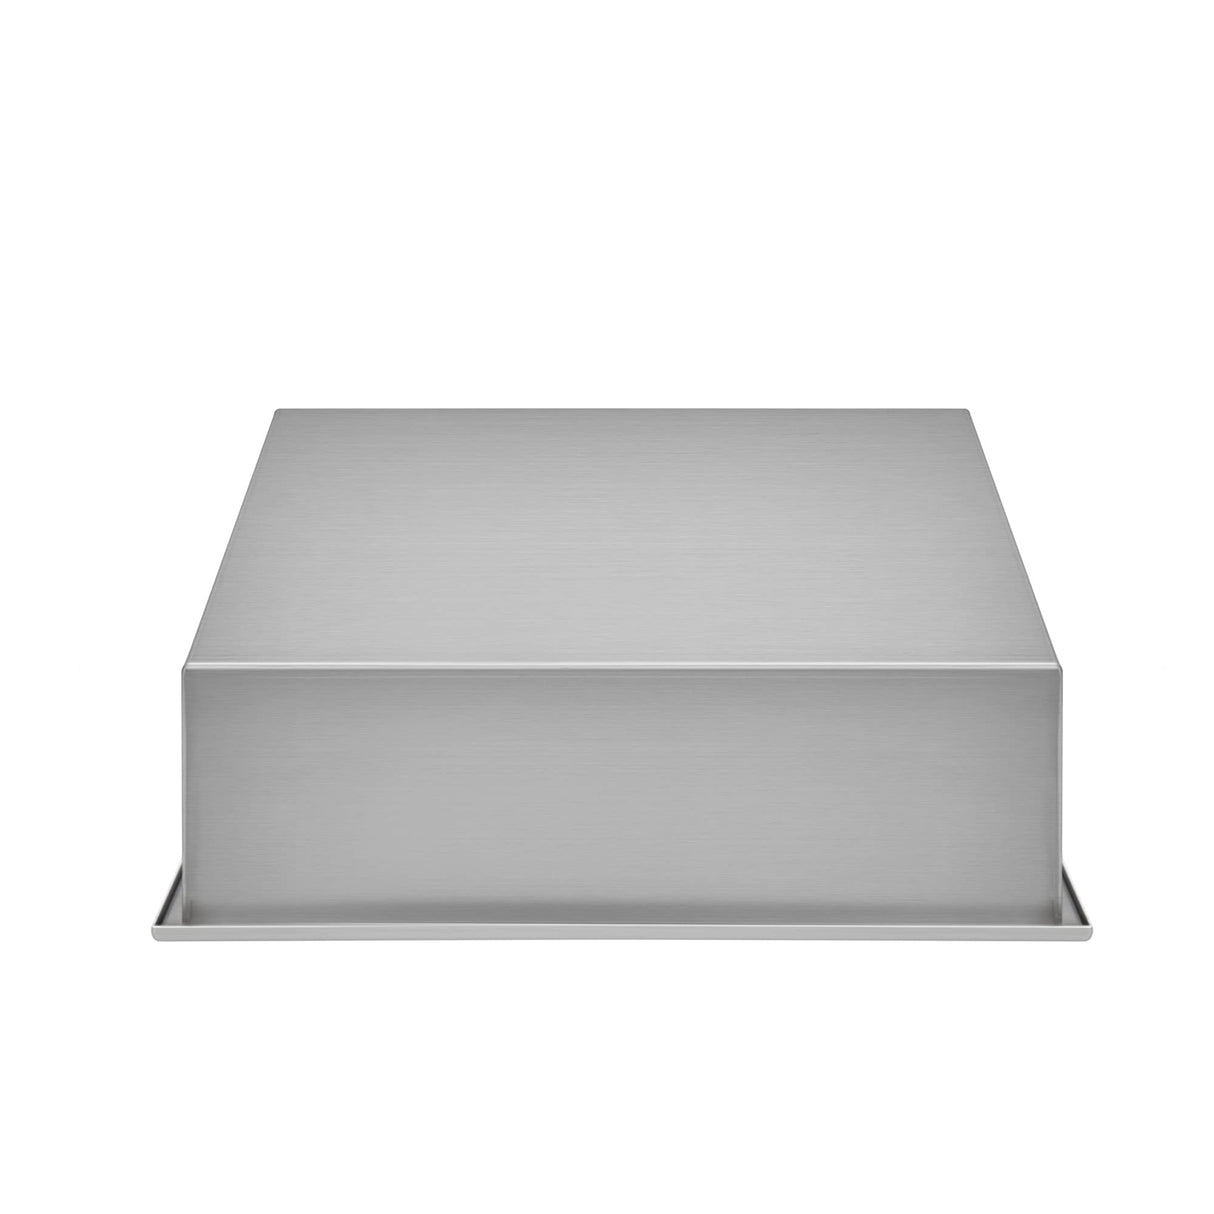 PULSE ShowerSpas NI-1212-SSB Niche in Brushed Stainless Steel